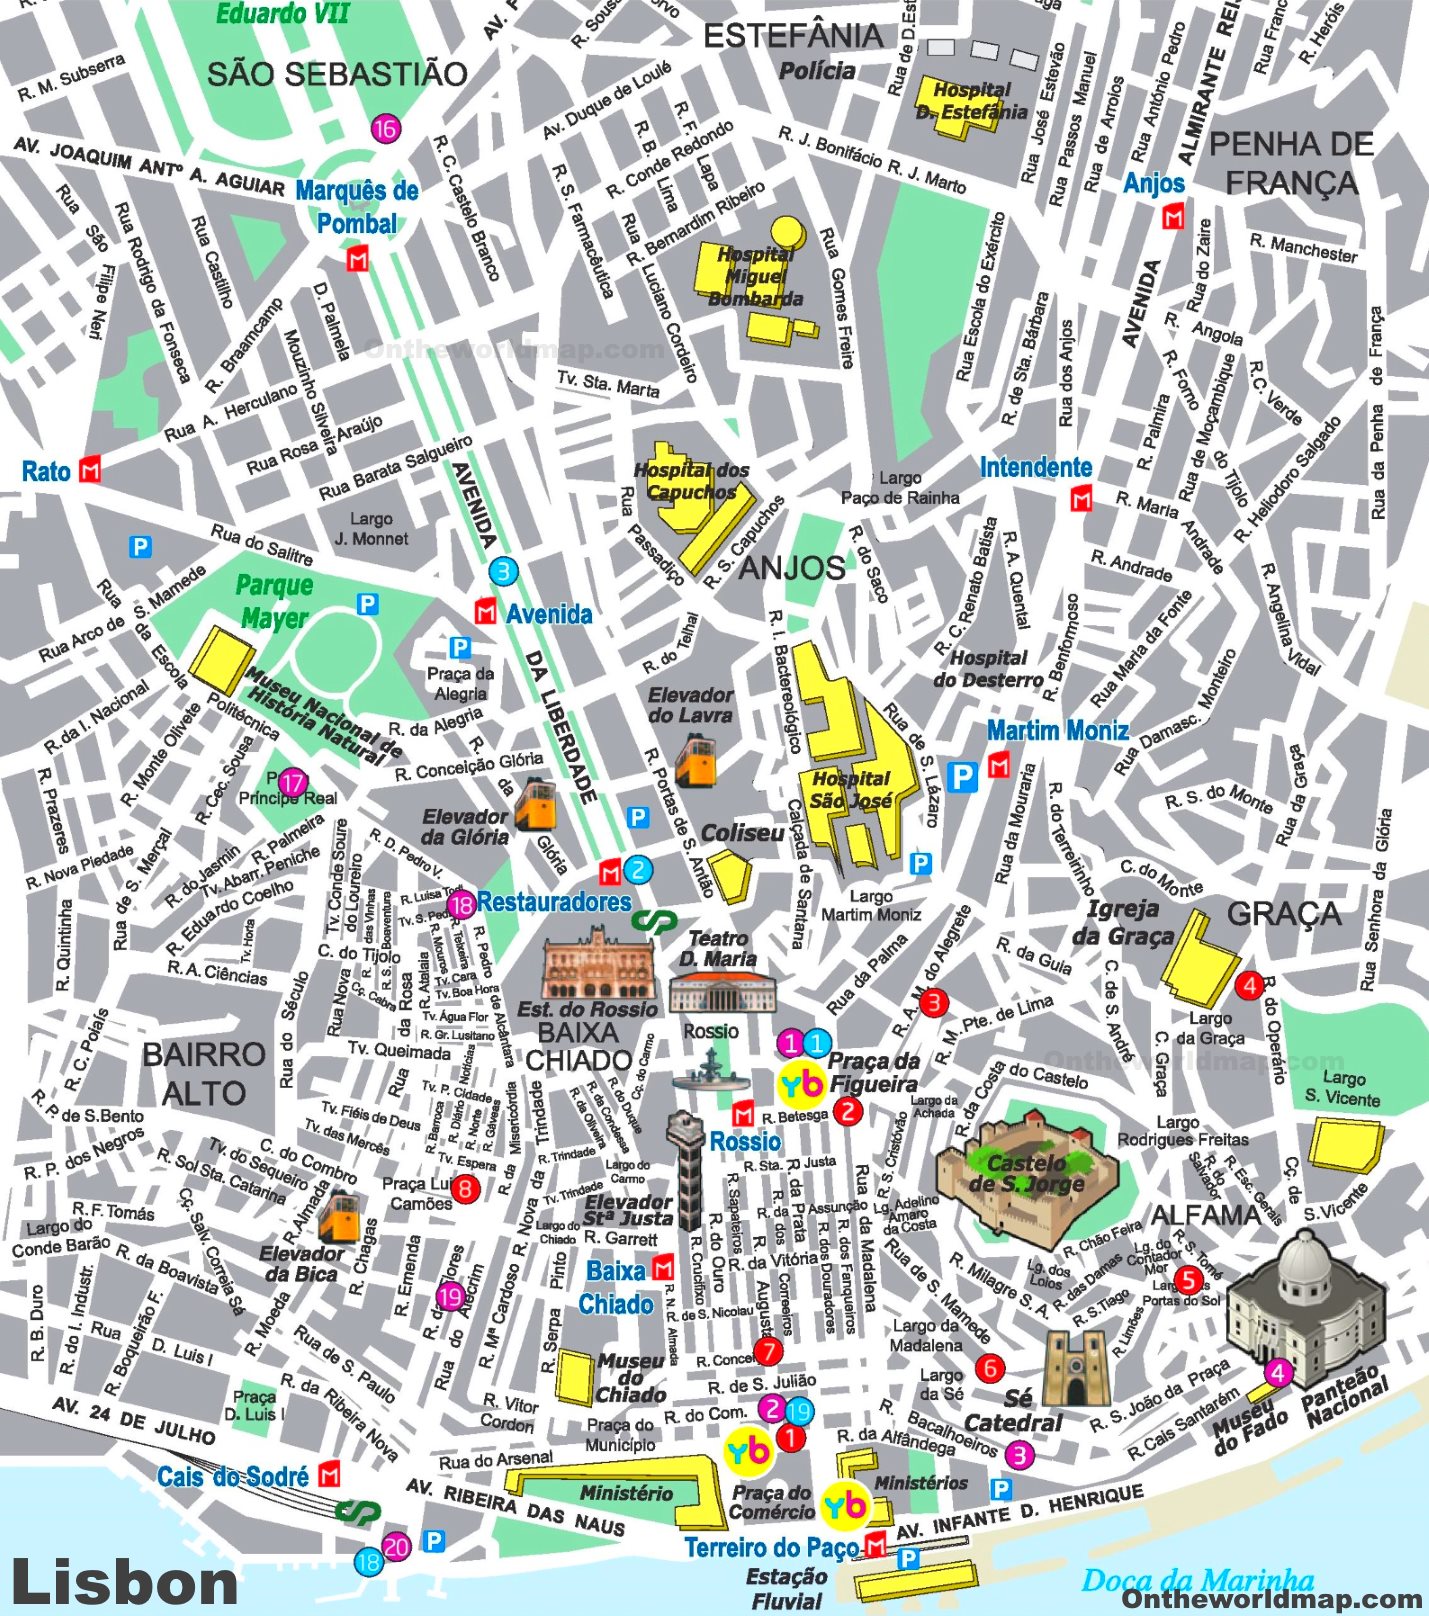 Lisbon Tourist Map With The Major Attractions And Nei - vrogue.co